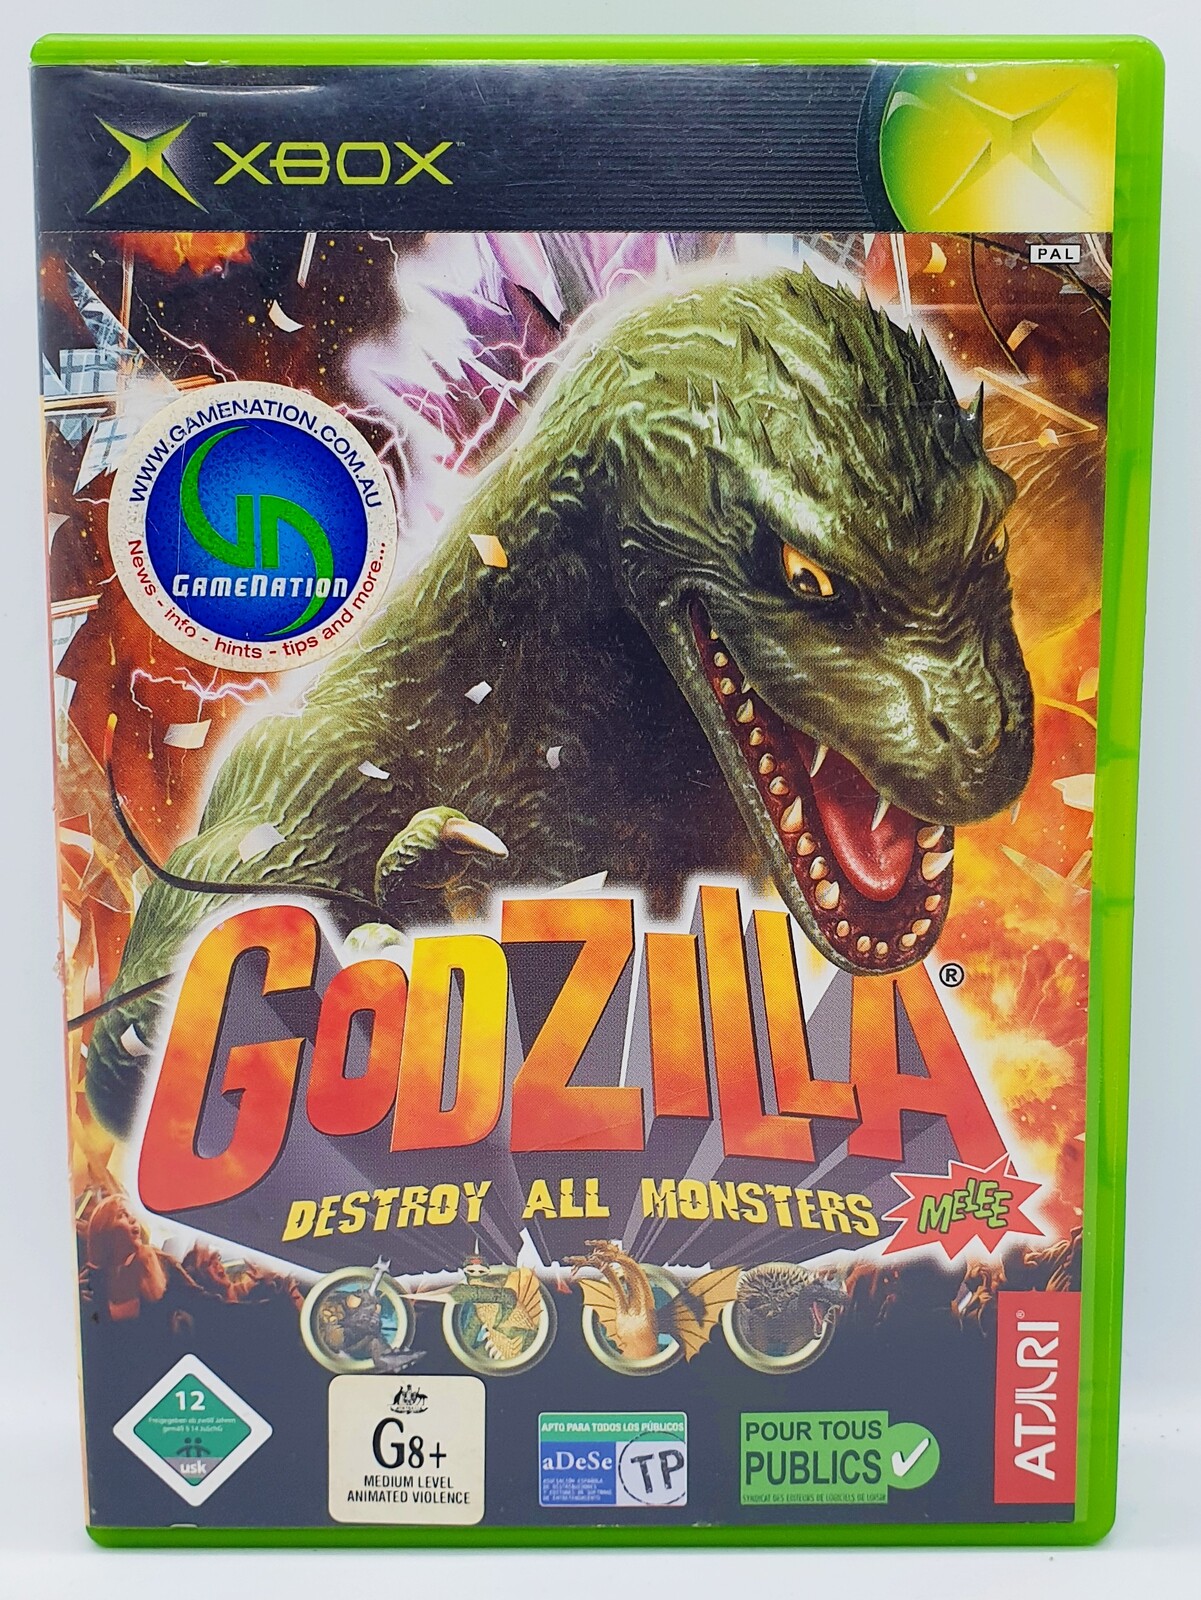 httpsgodzilla destroy all monsters melee xbox game rare